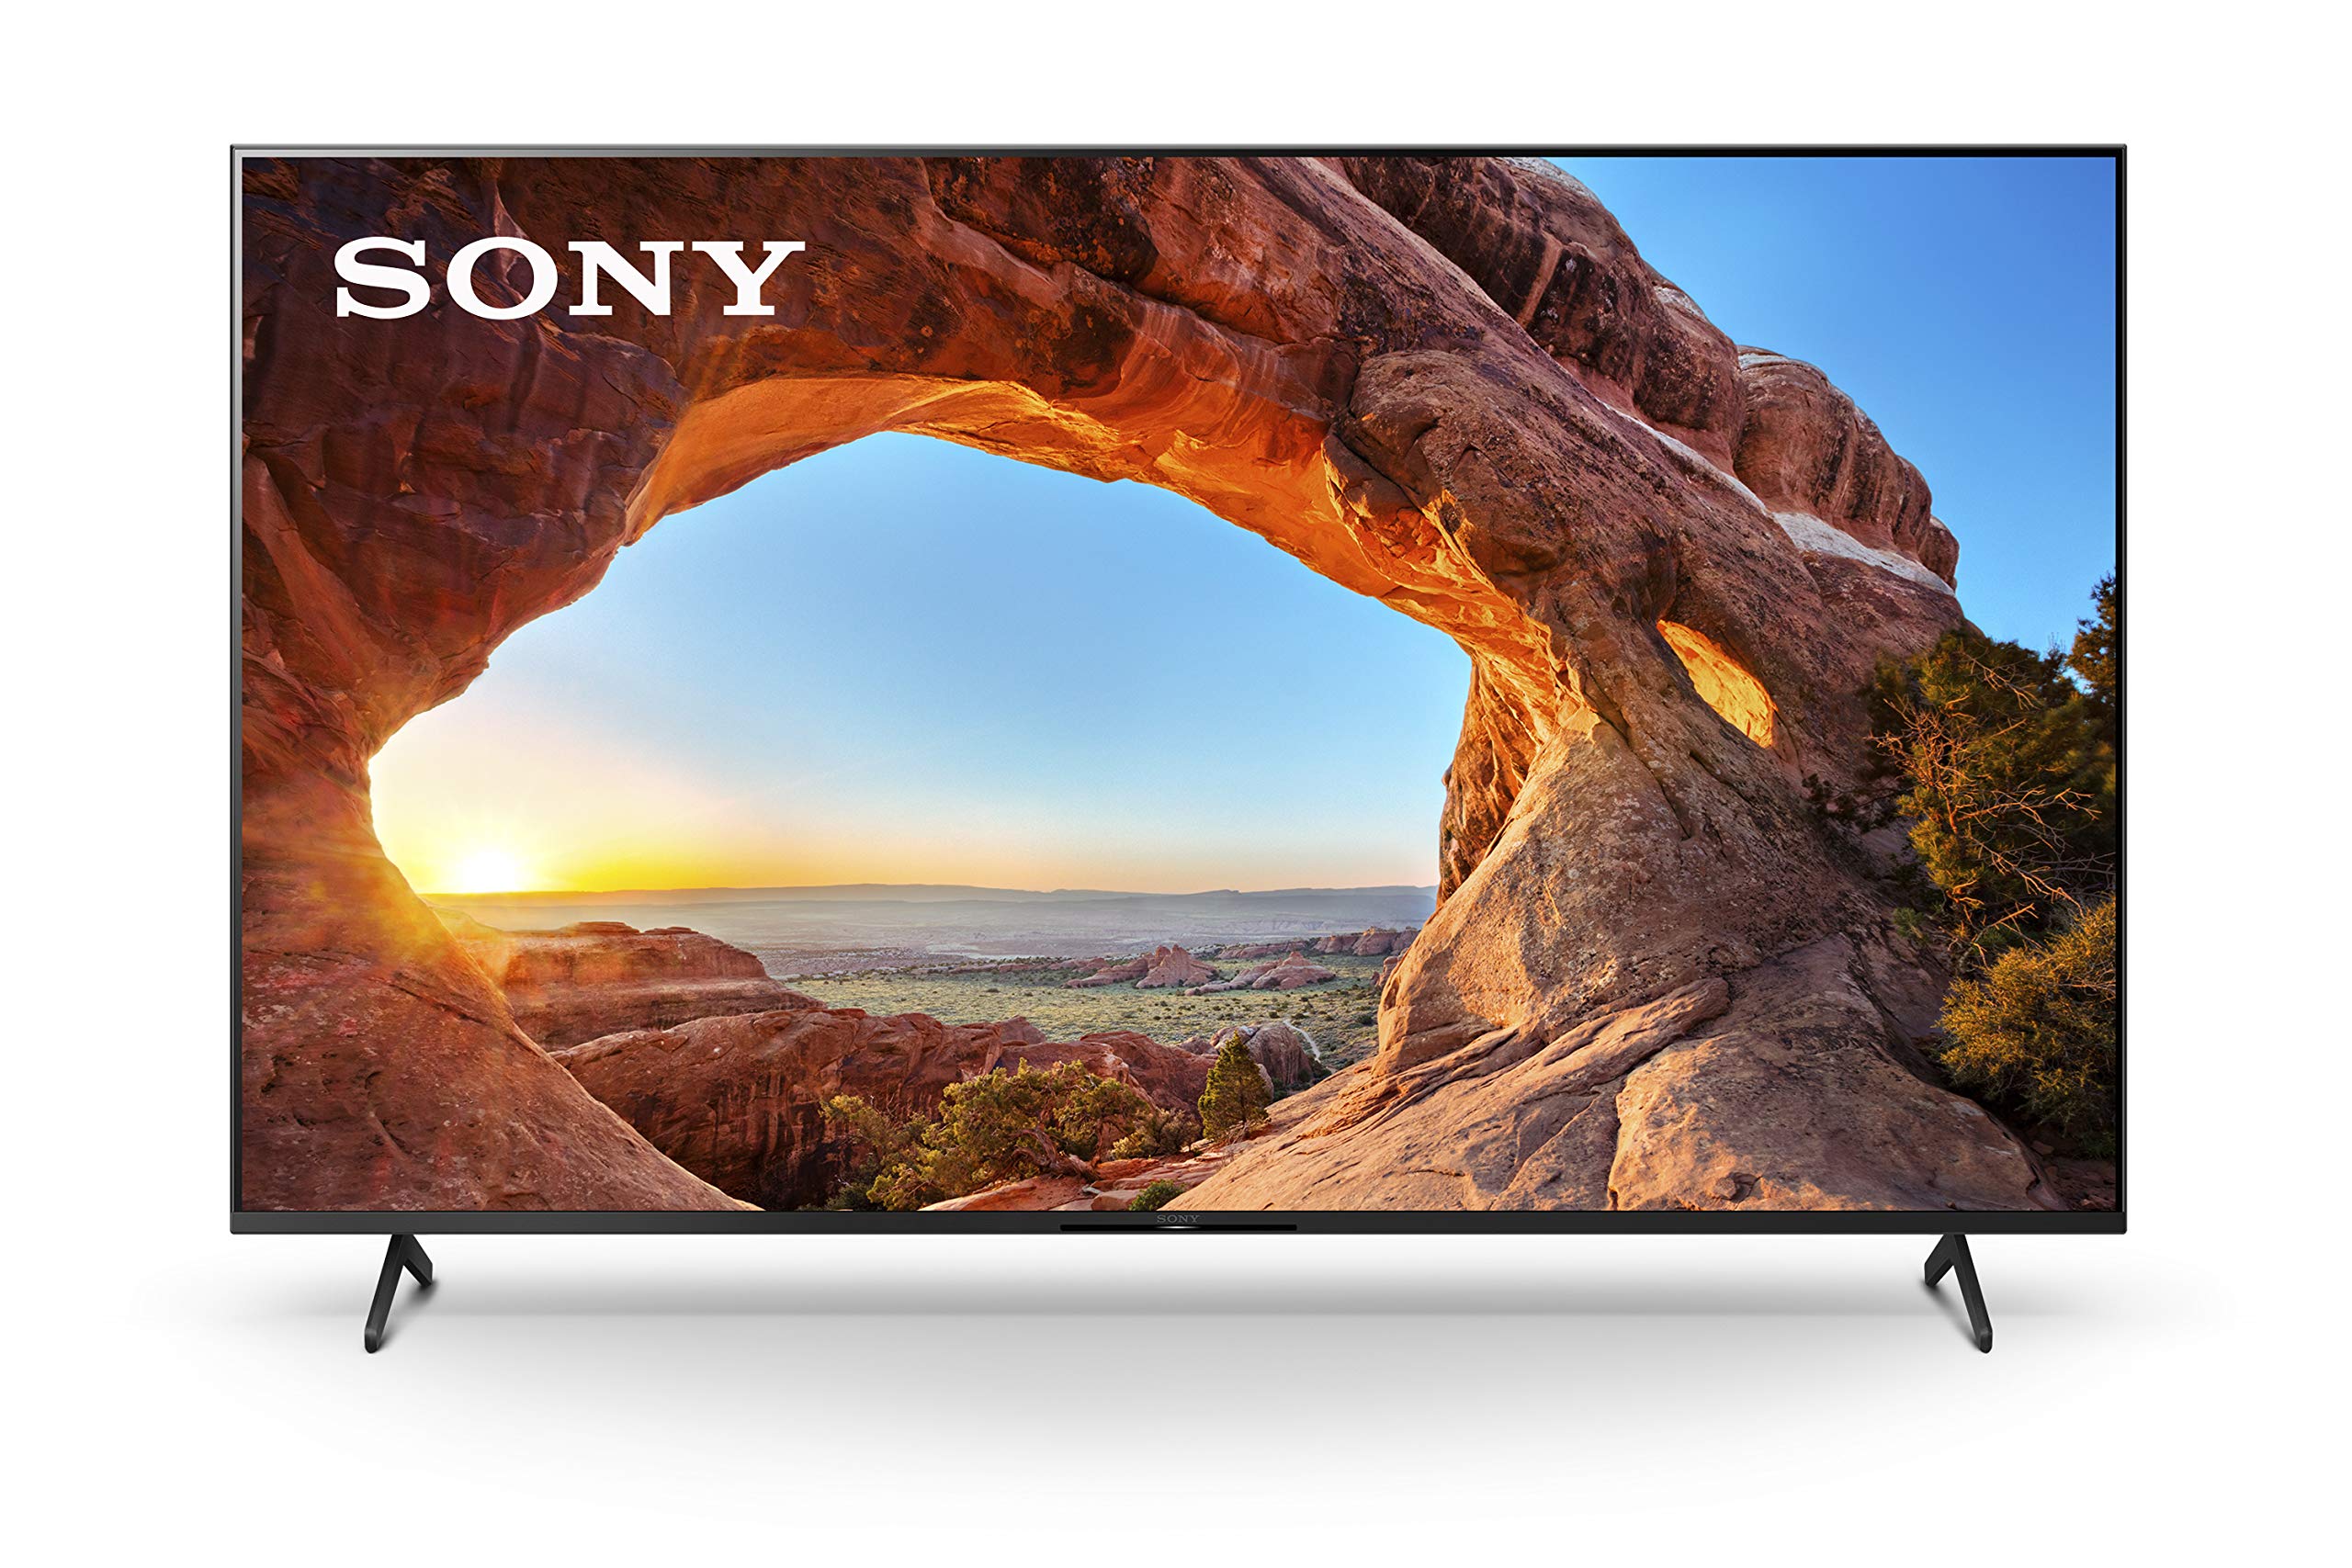 Sony X85J 65 Inch TV: 4K Ultra HD LED Smart Google TV with Native 120HZ Refresh Rate, Dolby Vision HDR KD65X85J- 2021 Model - $998.00 w/ Free Shipping @ Amazon